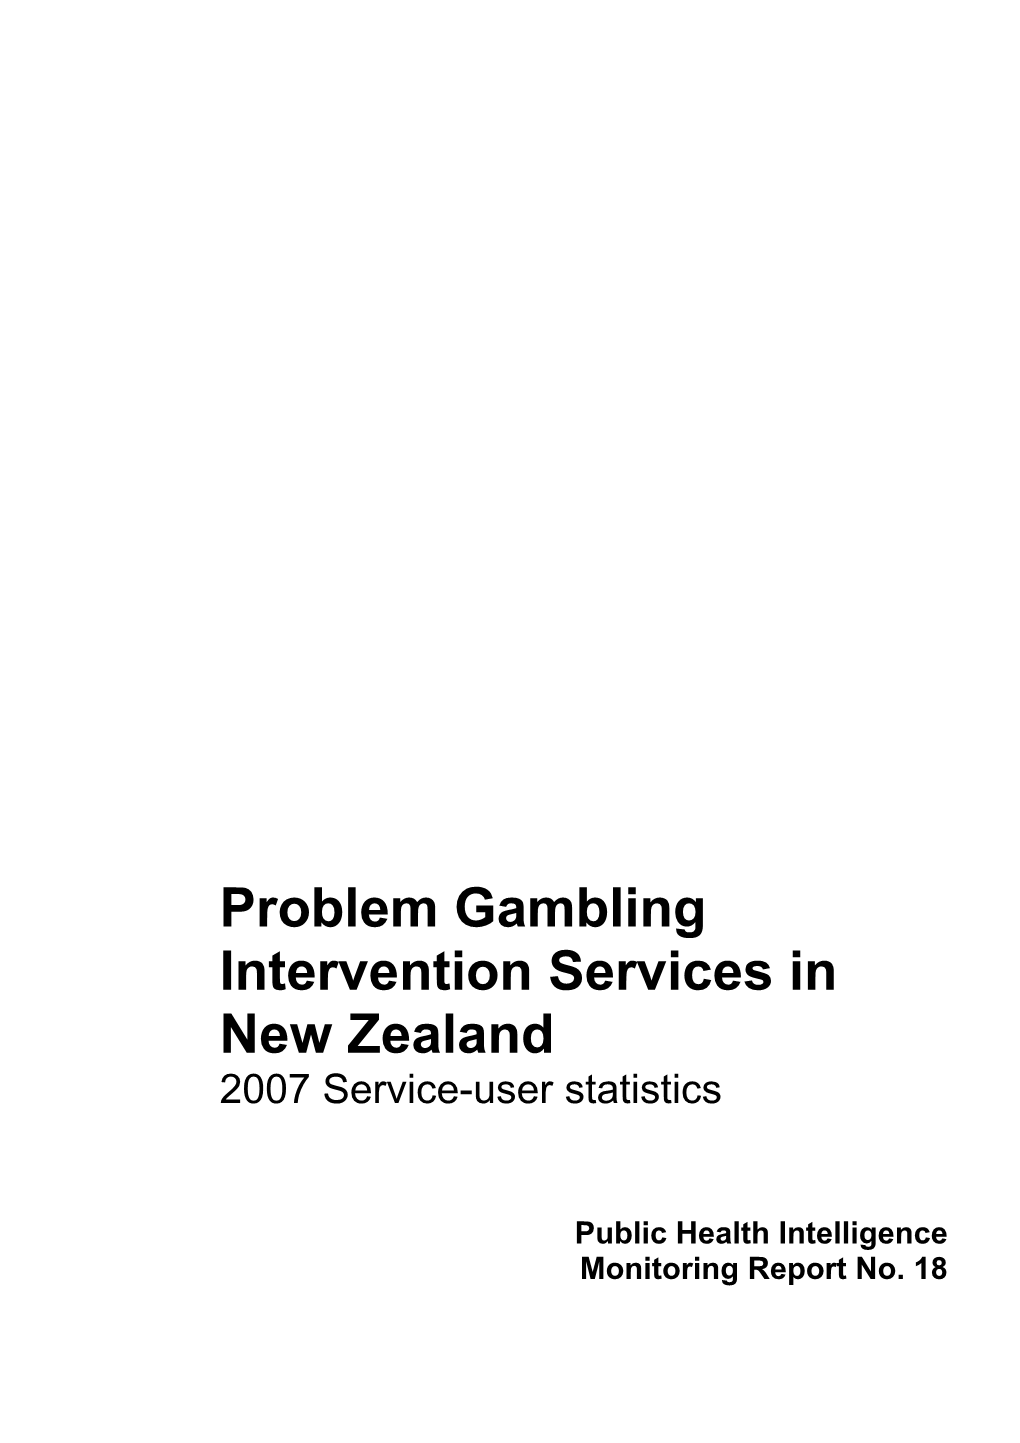 Problem Gambling Intervention Services in New Zealand